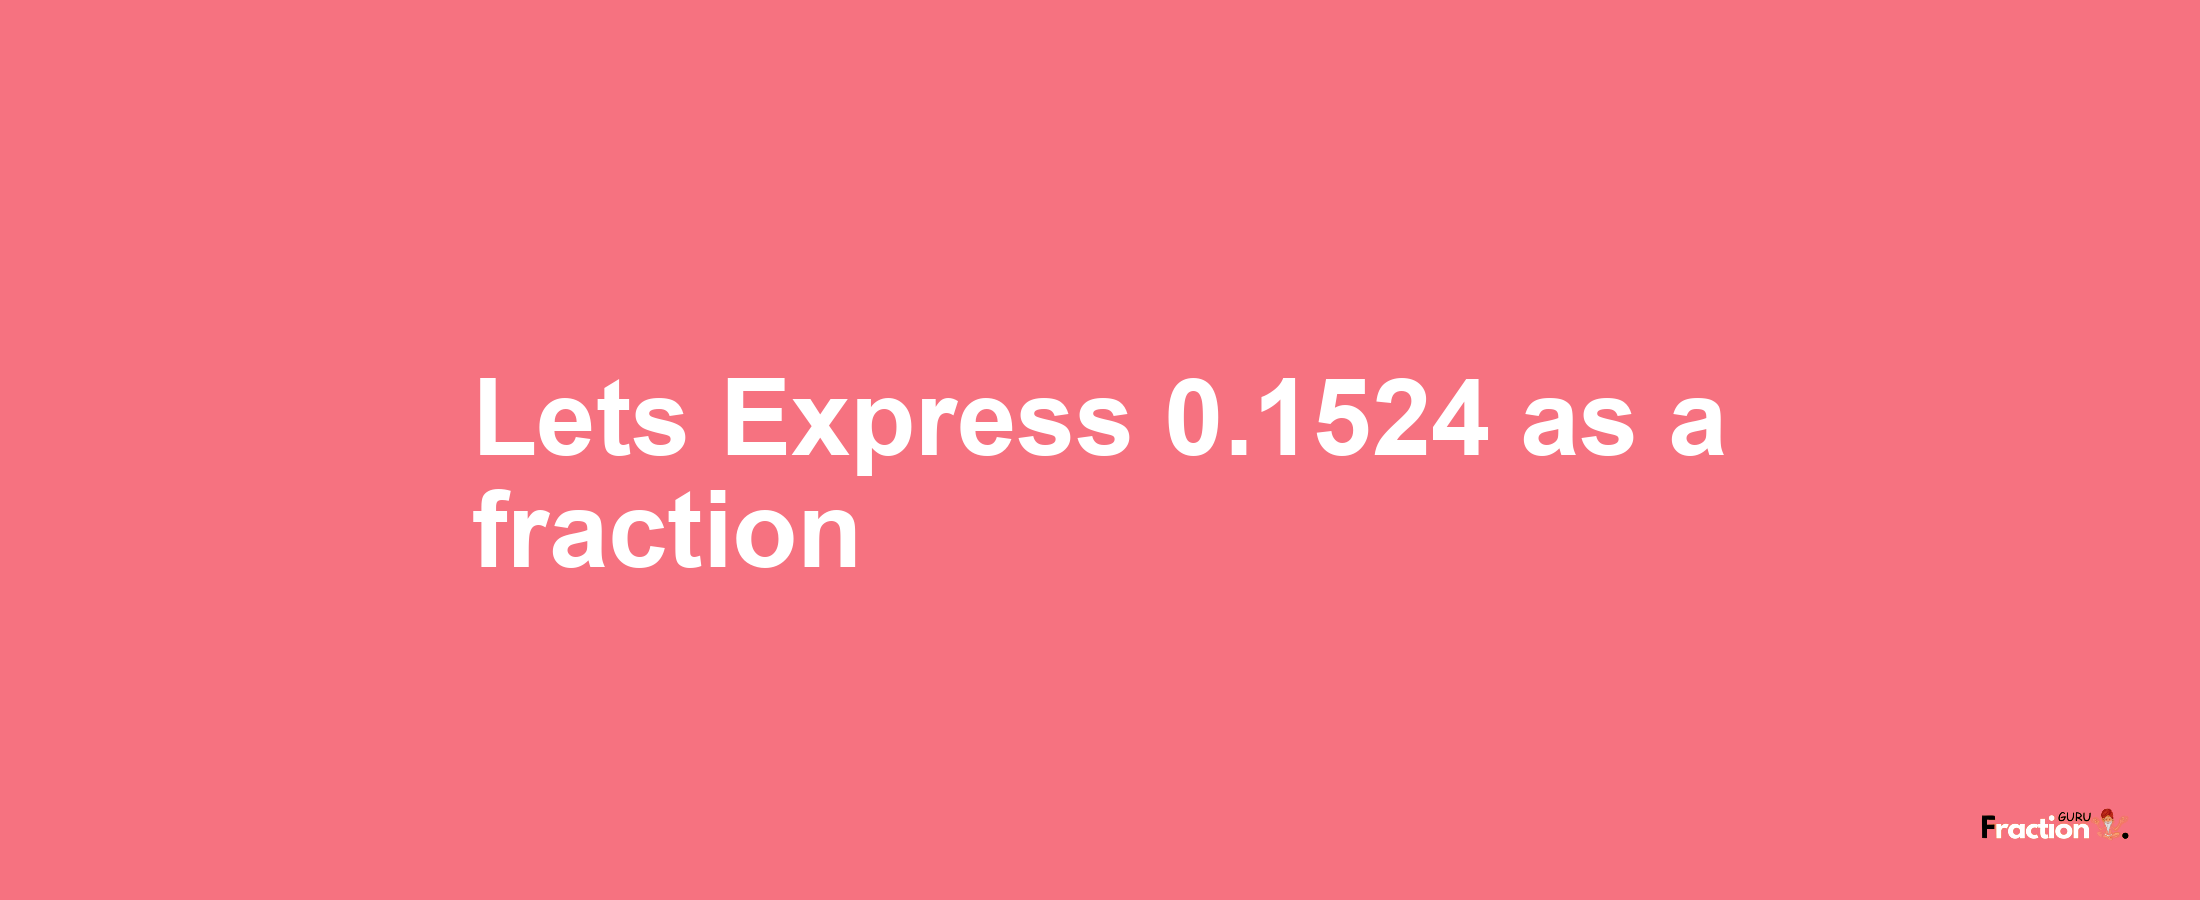 Lets Express 0.1524 as afraction